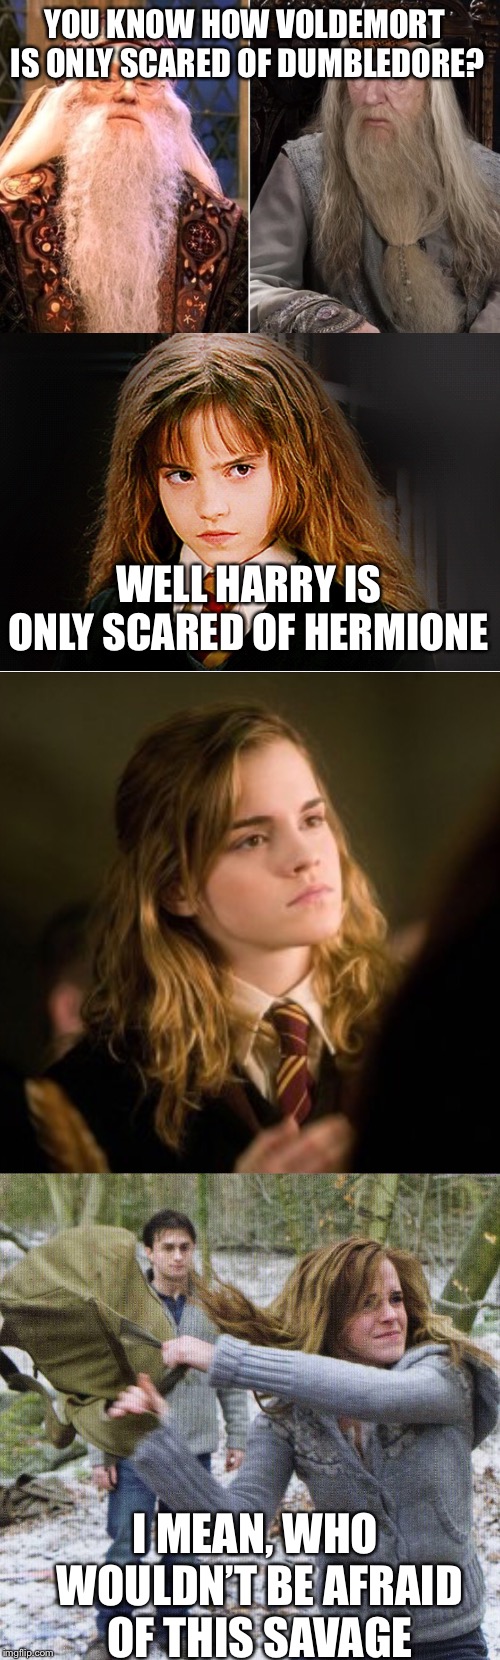 YOU KNOW HOW VOLDEMORT IS ONLY SCARED OF DUMBLEDORE? WELL HARRY IS ONLY SCARED OF HERMIONE; I MEAN, WHO WOULDN’T BE AFRAID OF THIS SAVAGE | made w/ Imgflip meme maker